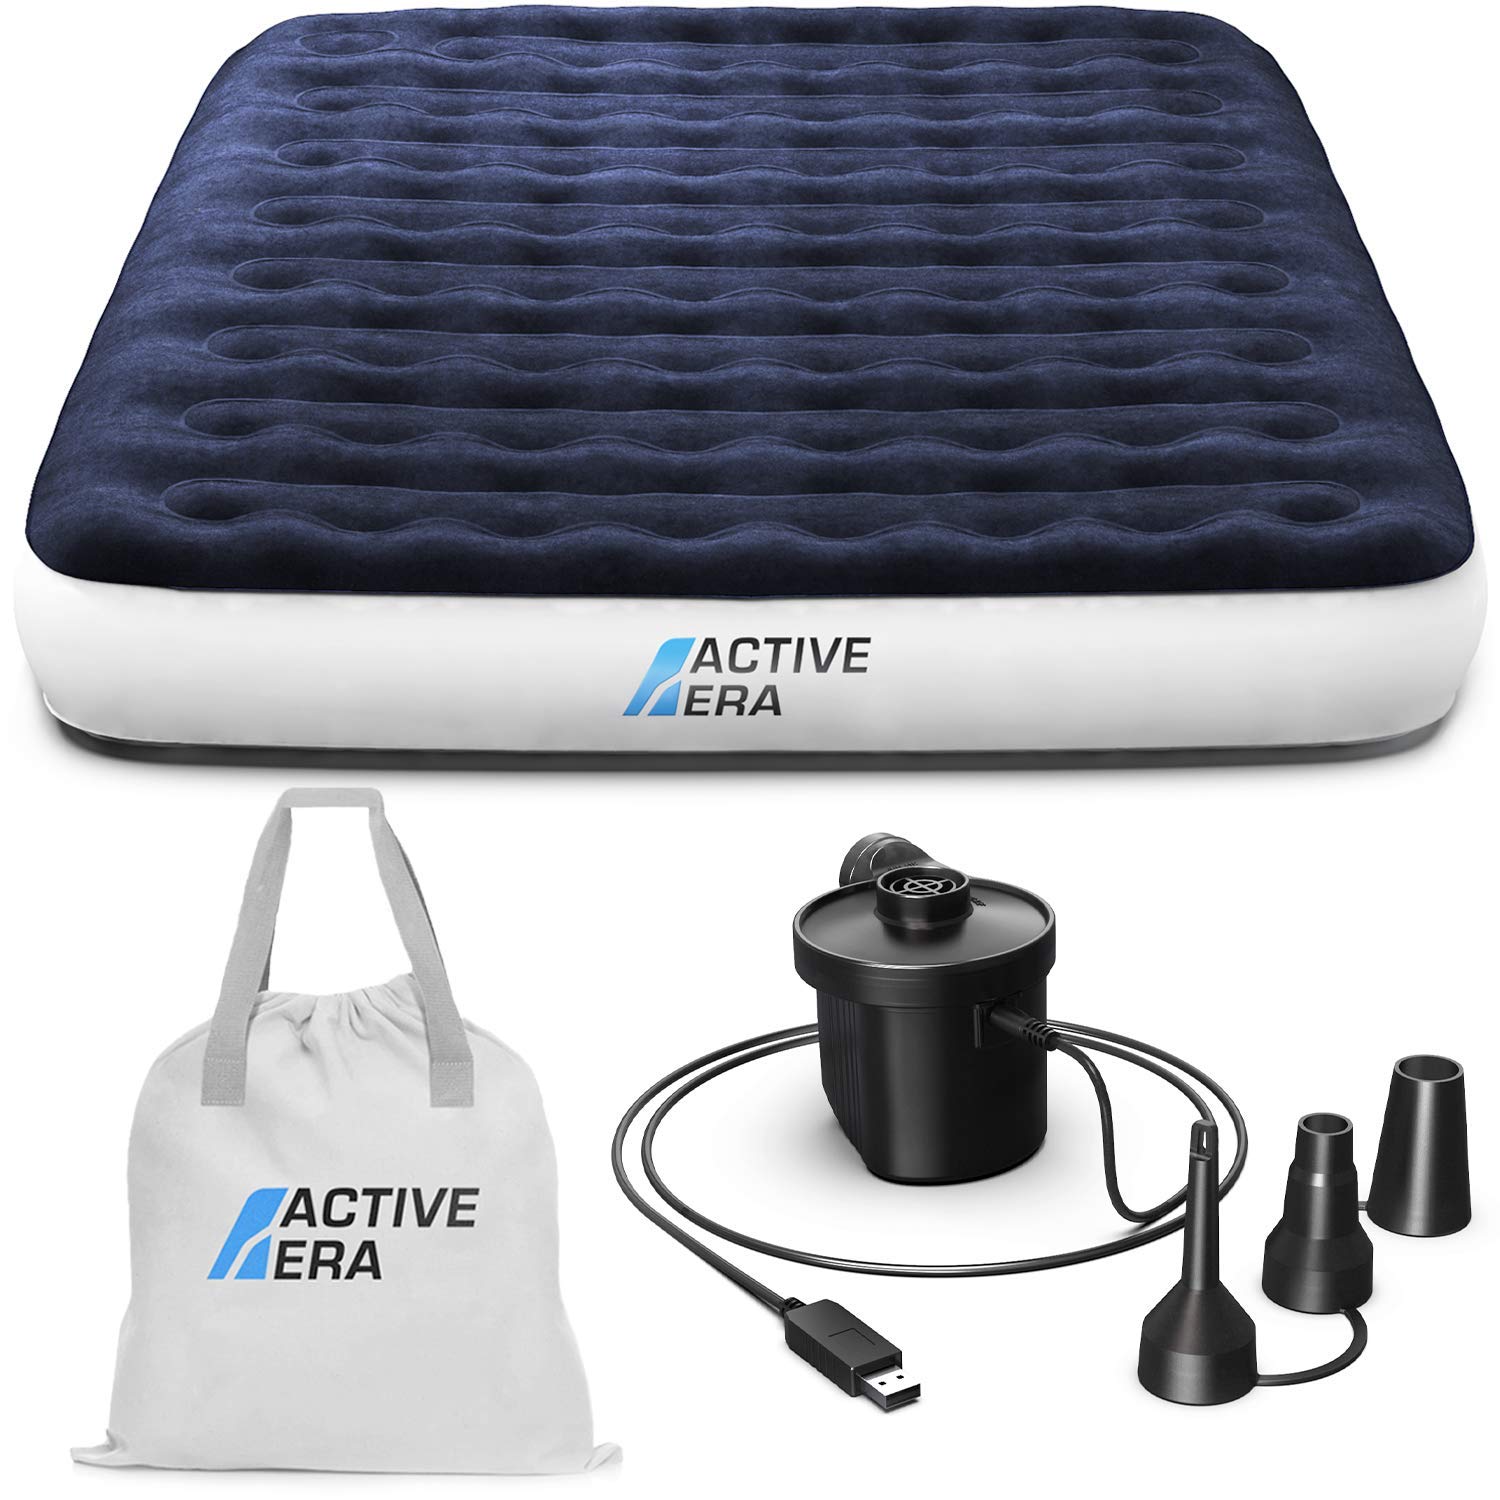 Active Era Camping Air Bed with USB Rechargeable Pump - Inflatable Air Mattress with Integrated Pillow, Travel Bag, Portable Air Pump with USB Charging Cable and Foot Pump